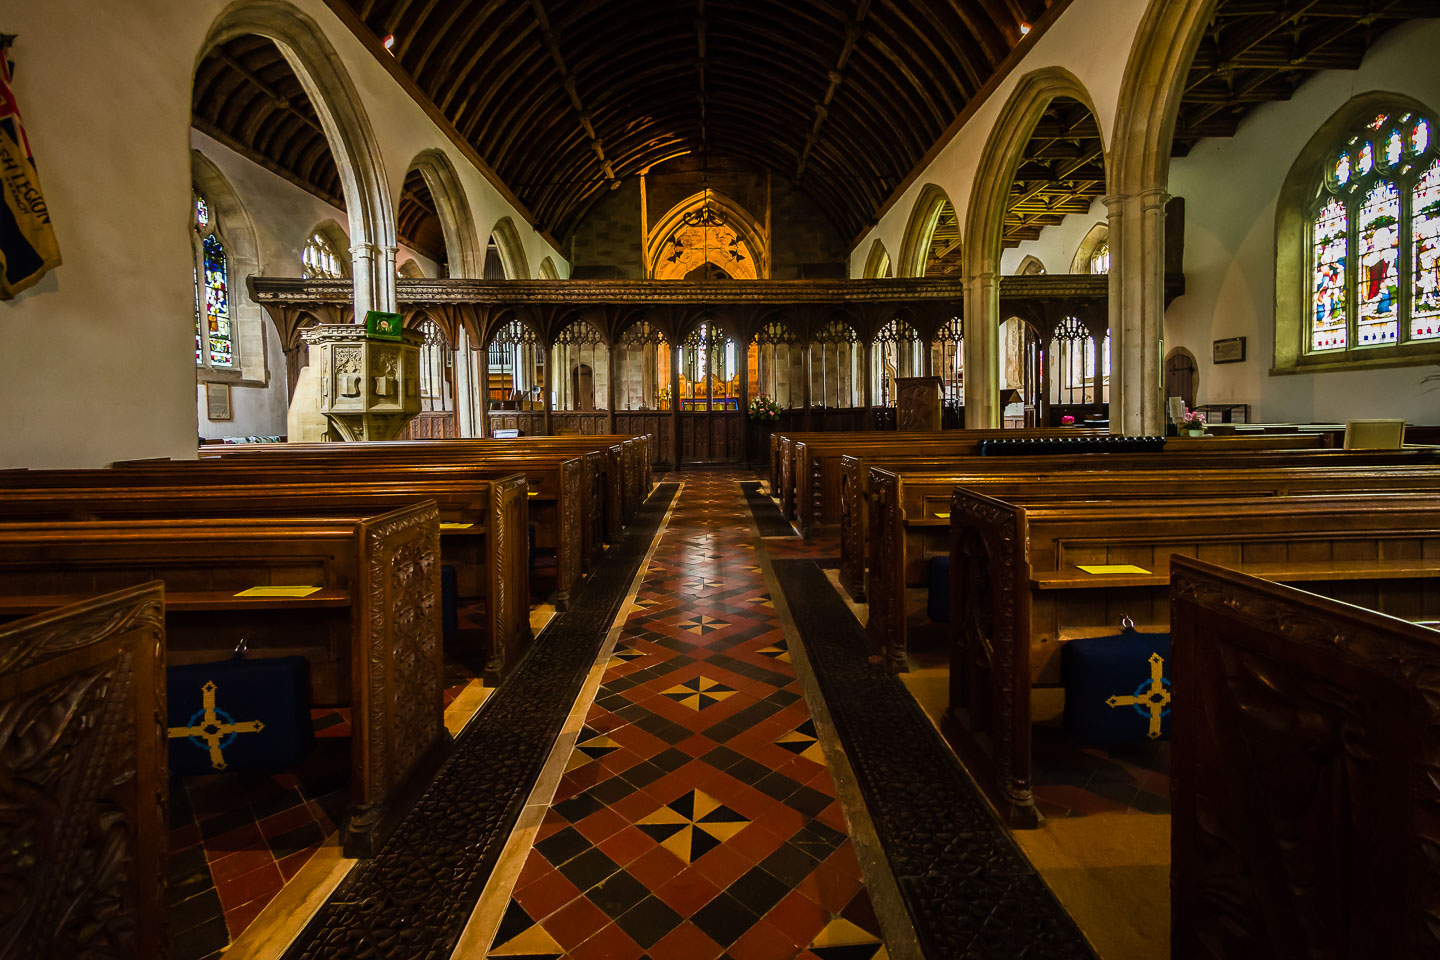 GB150079-E-Dunster-Interior-and-screen-at-the-Priory-Church-of-St-George.jpg